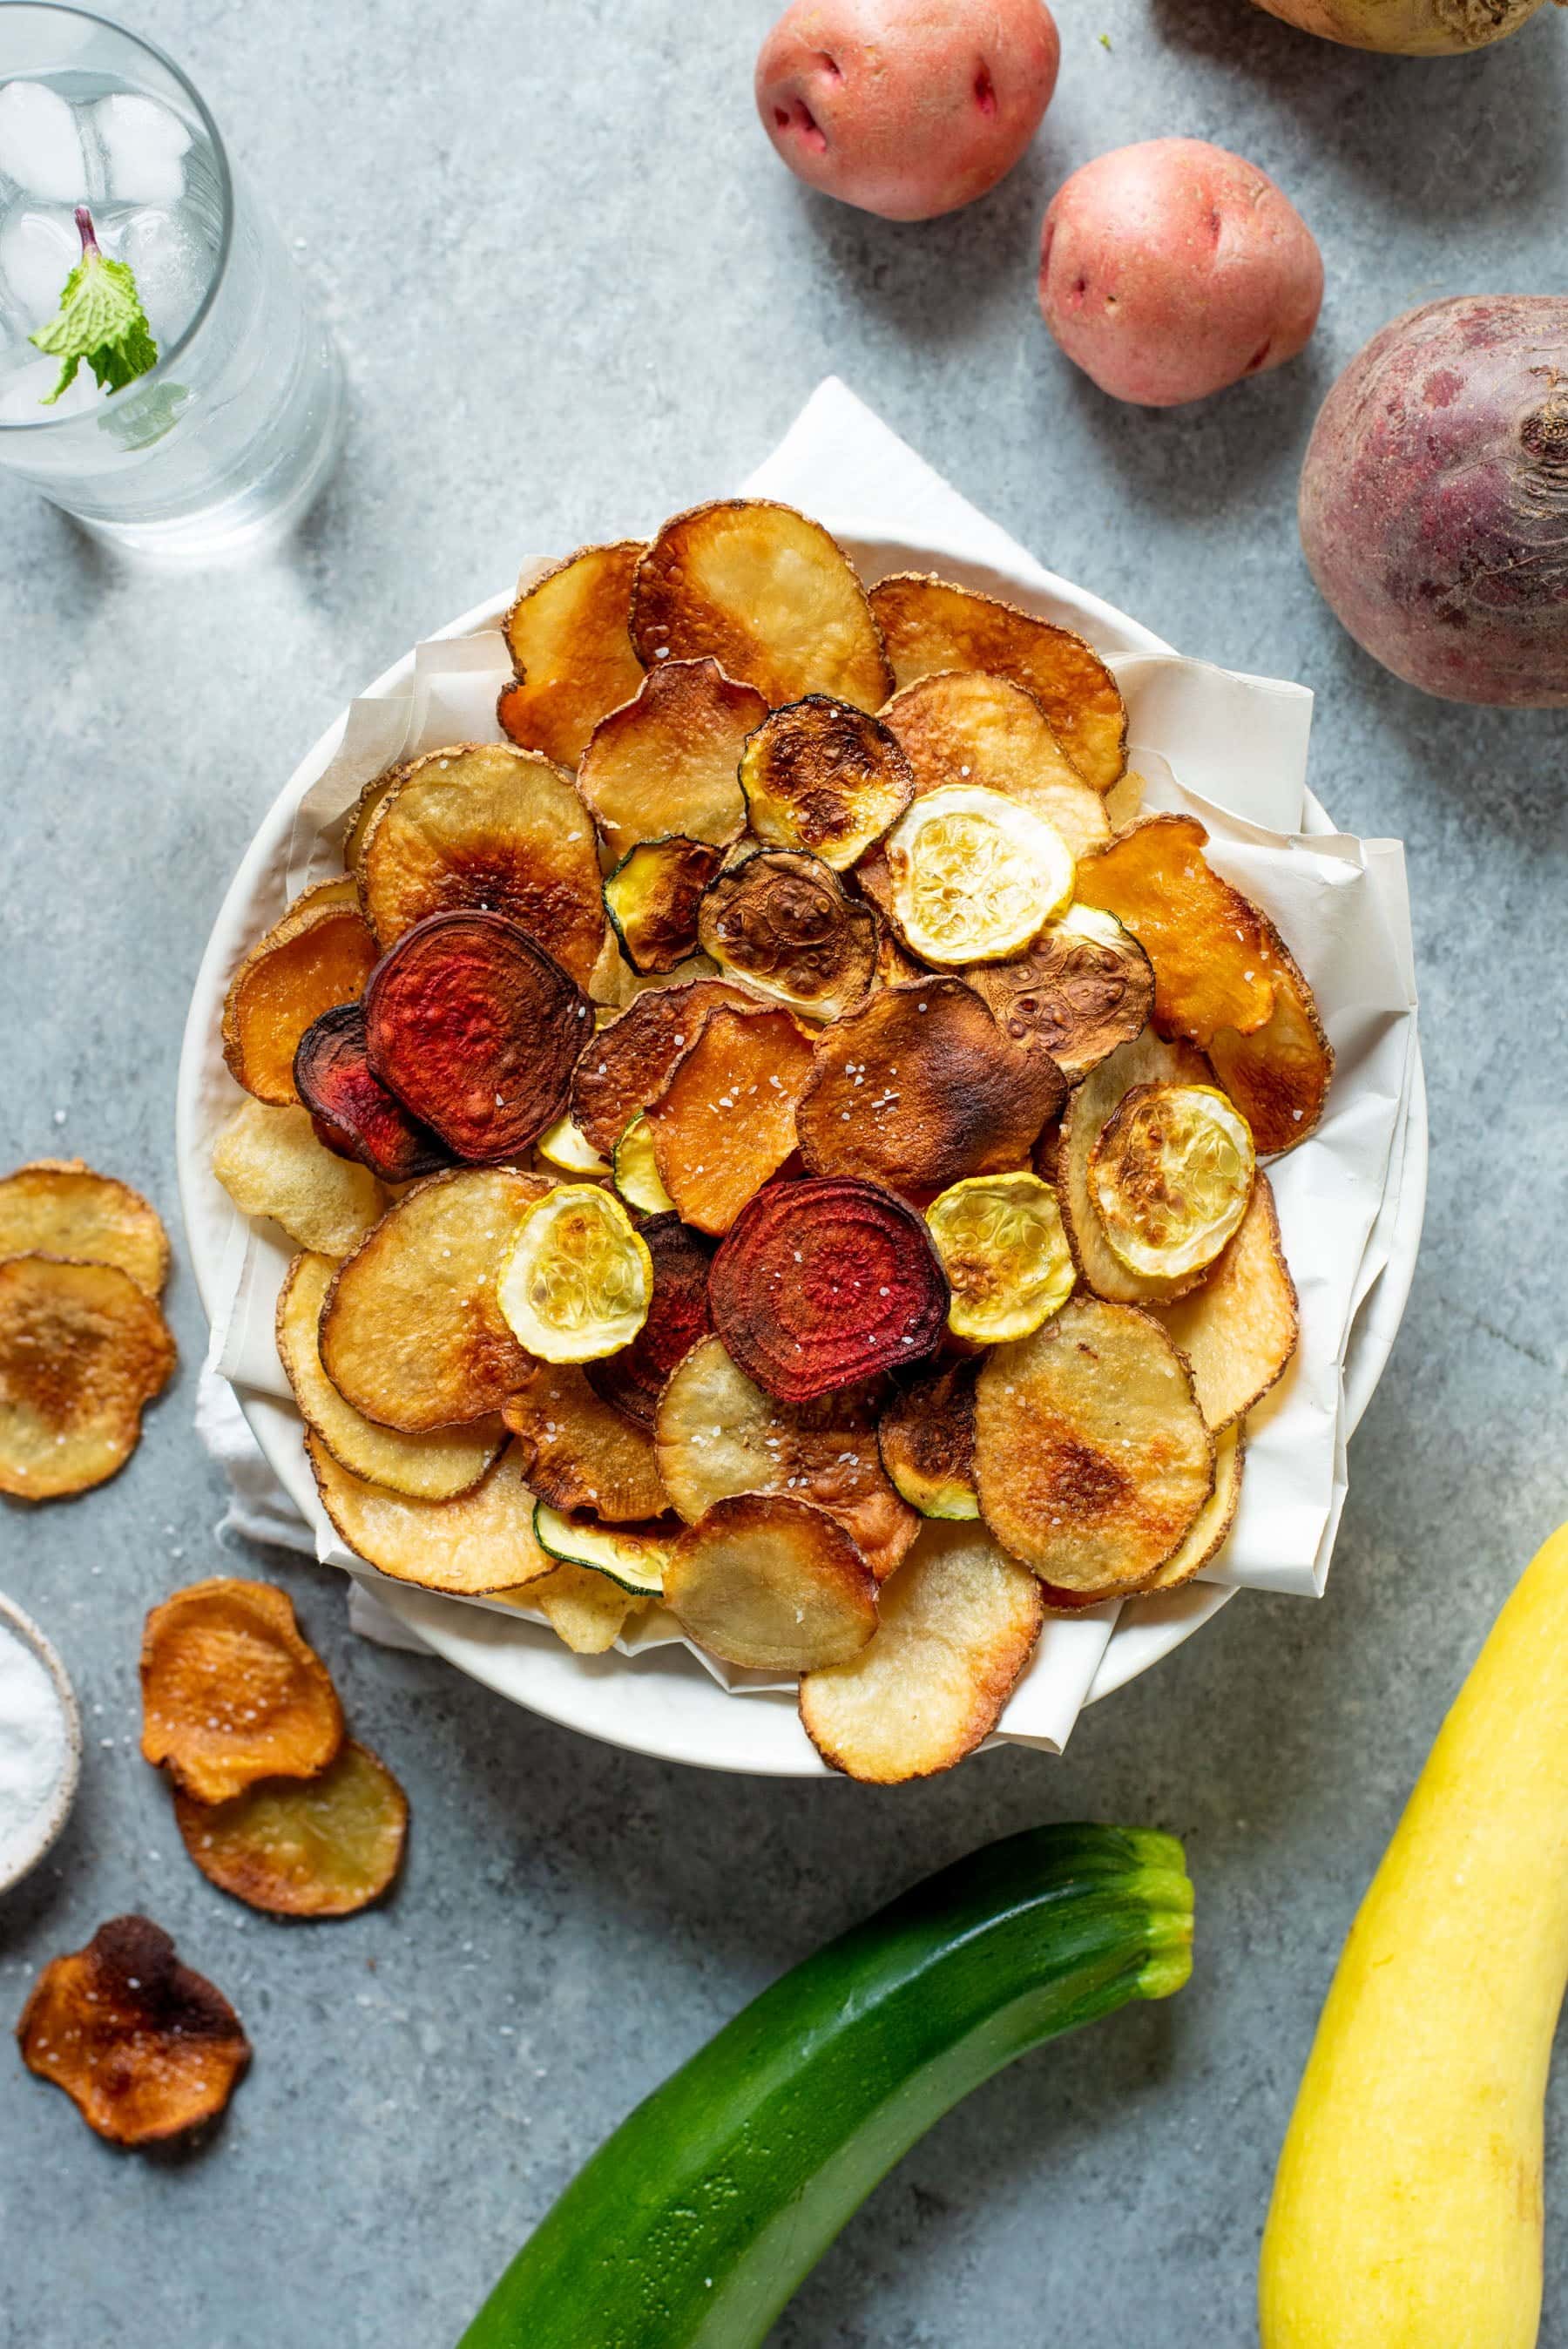 Overhead shot of Baked Vegetable Chips in a white bowl, surrounded by whole veggies